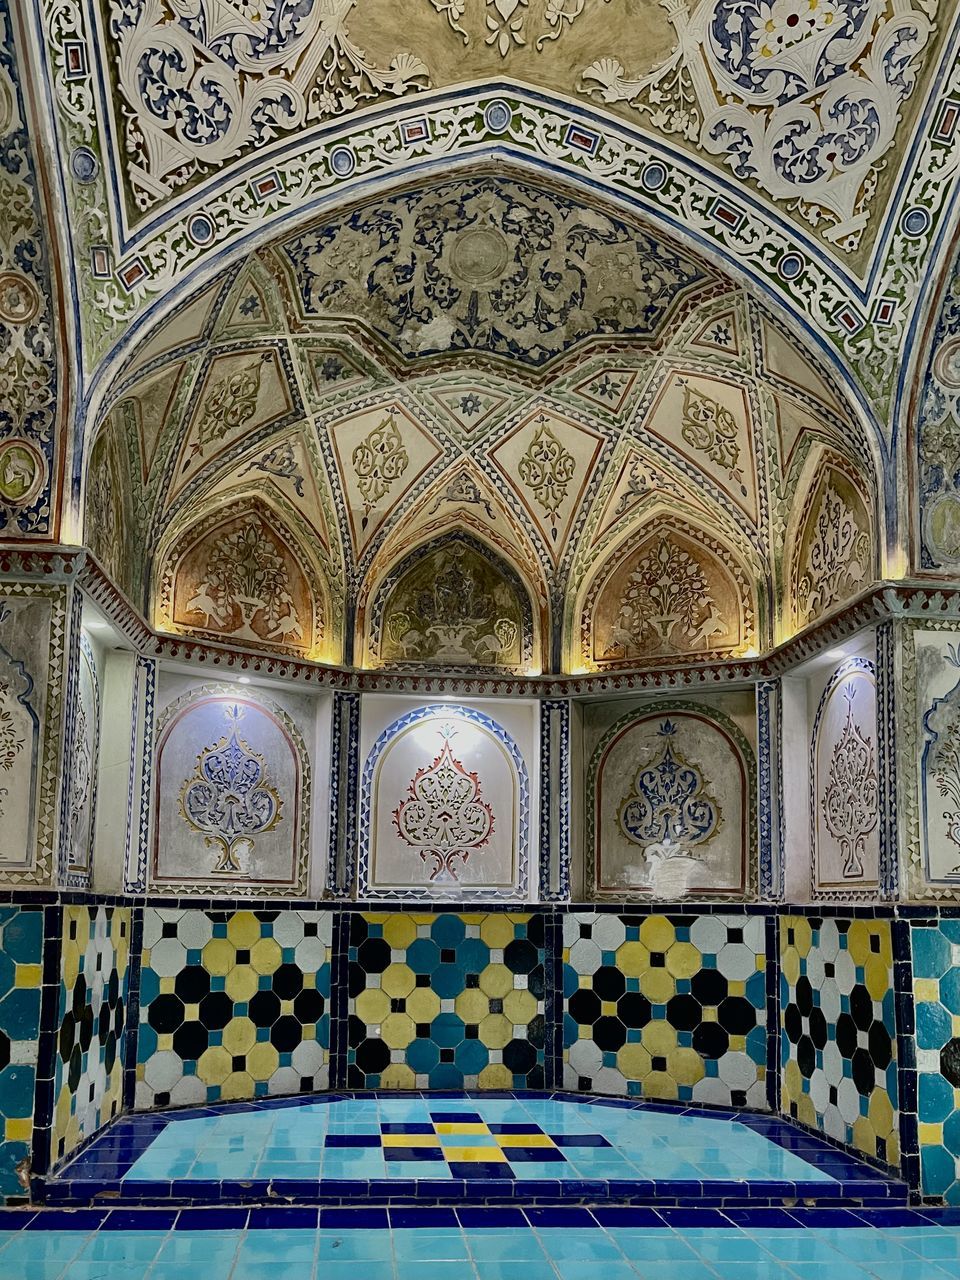 architecture, built structure, indoors, pattern, arch, ceiling, tile, building, place of worship, flooring, religion, no people, art, ornate, belief, mural, creativity, travel destinations, mosaic, spirituality, palace, the past, tiled floor, architectural feature, history, craft, day, fresco, facade, multi colored